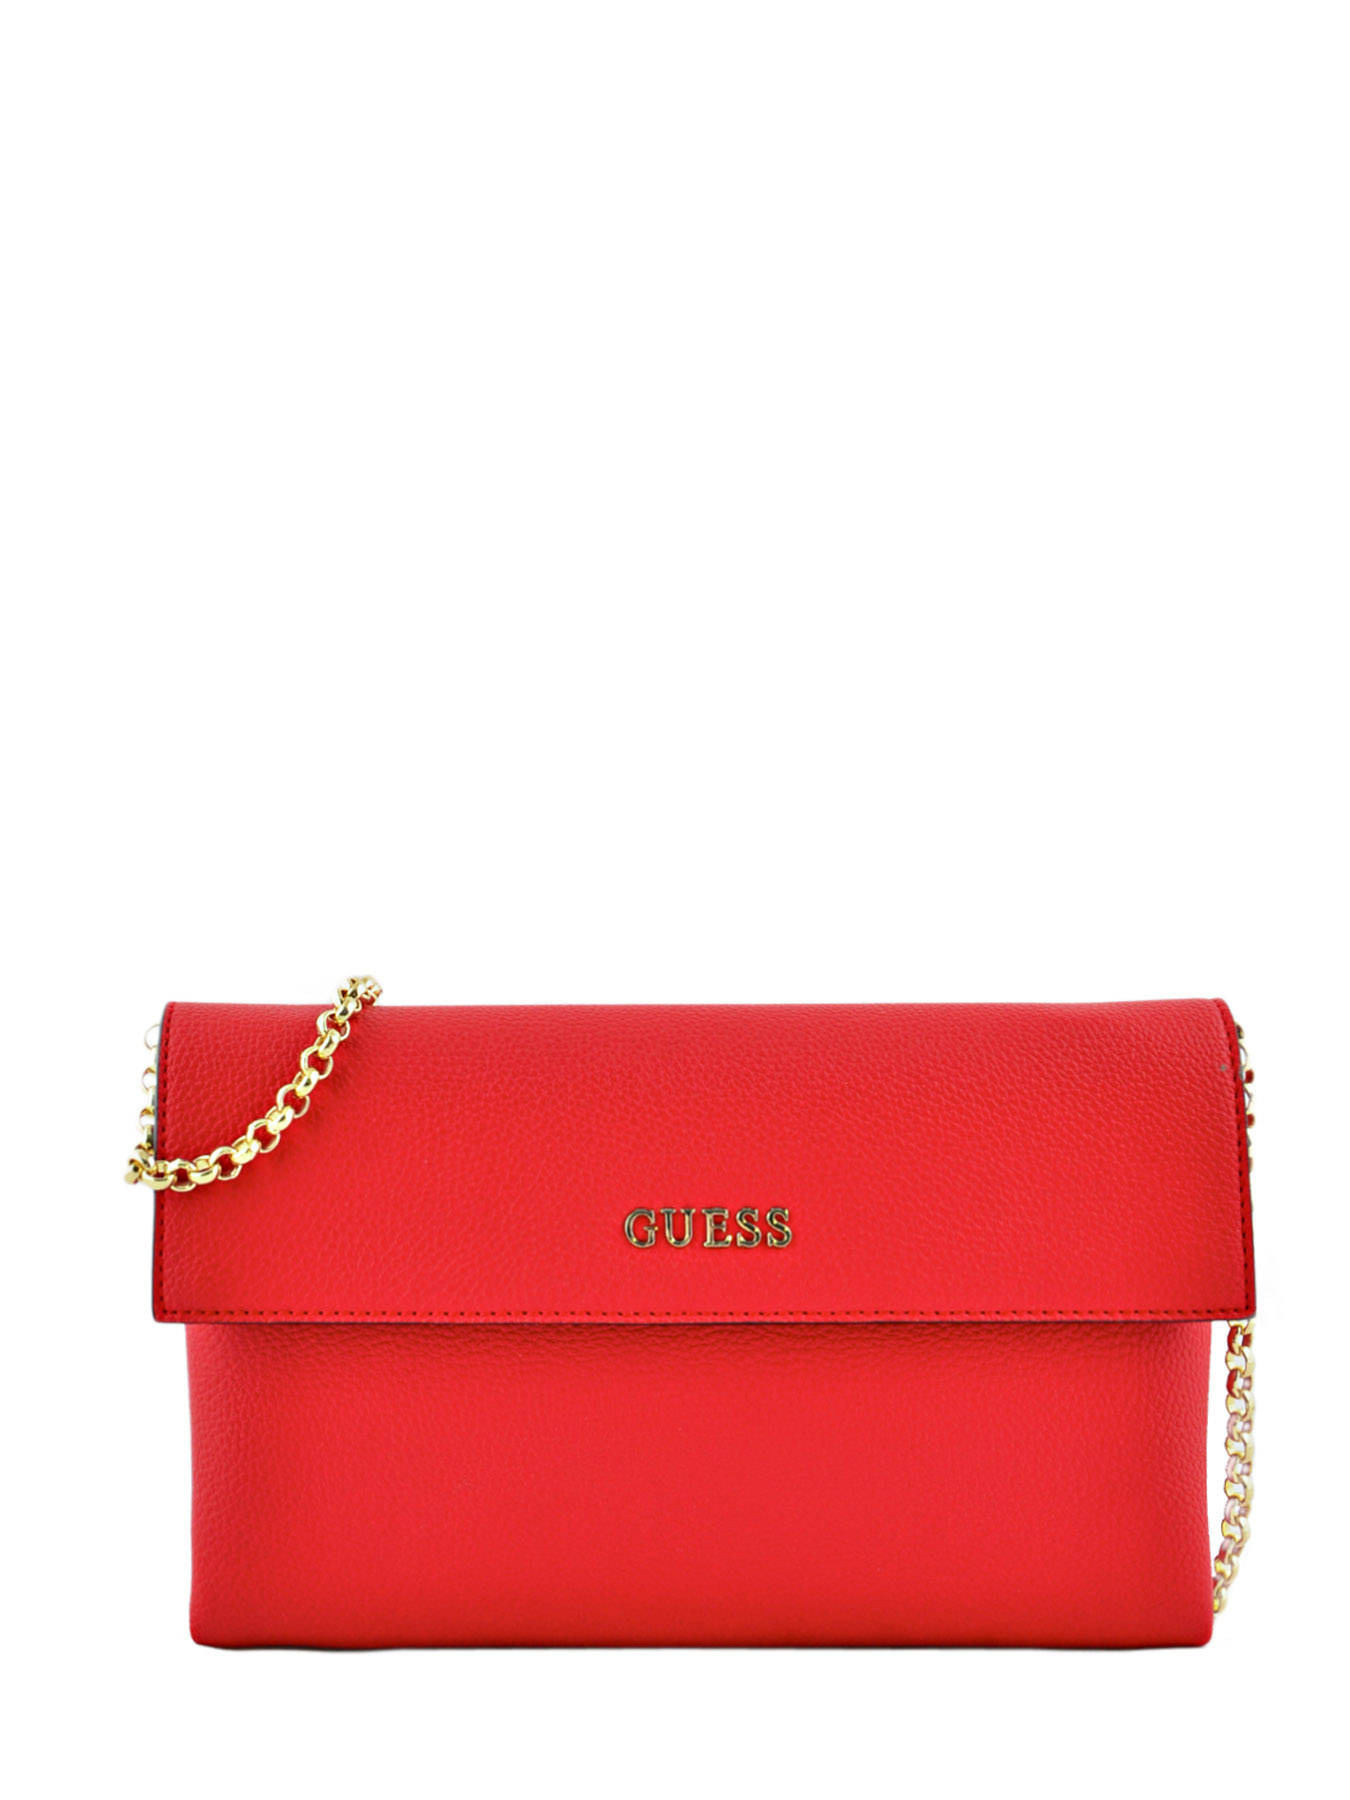 Guess Clutch bag Tulip - Best prices